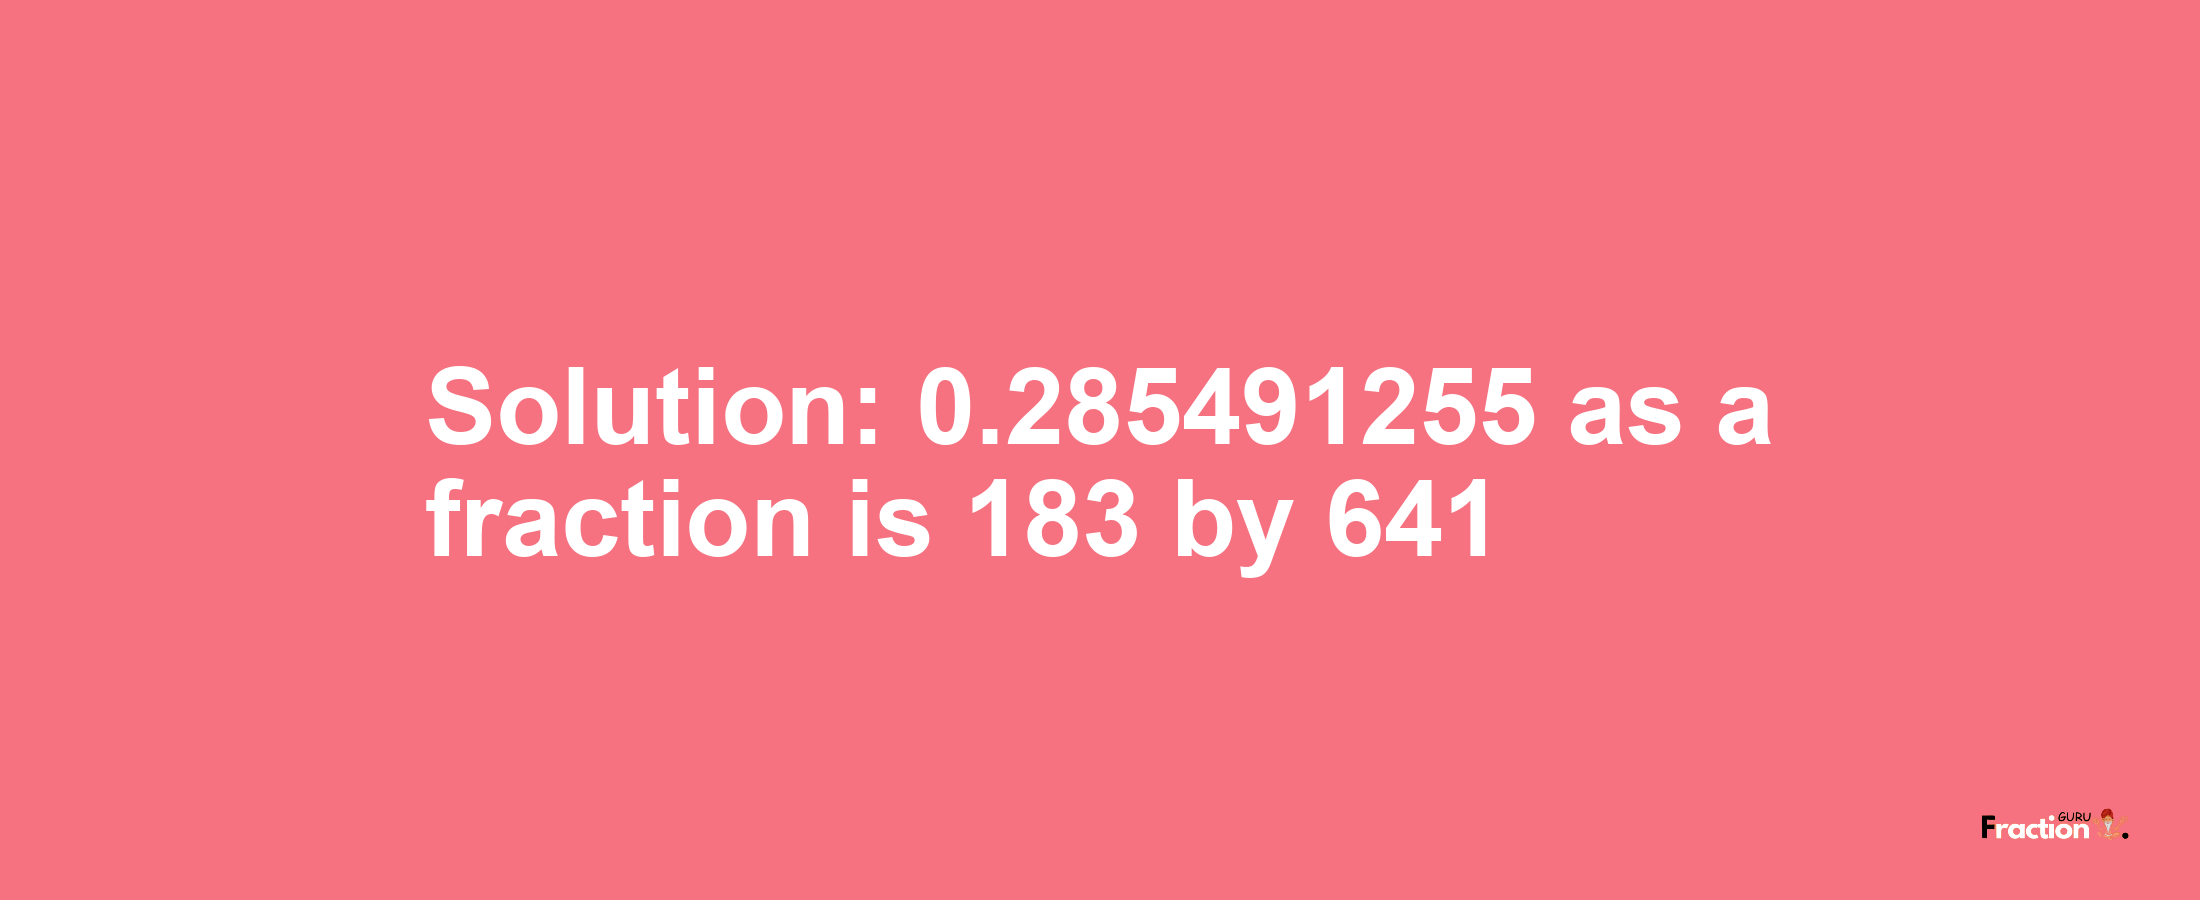 Solution:0.285491255 as a fraction is 183/641